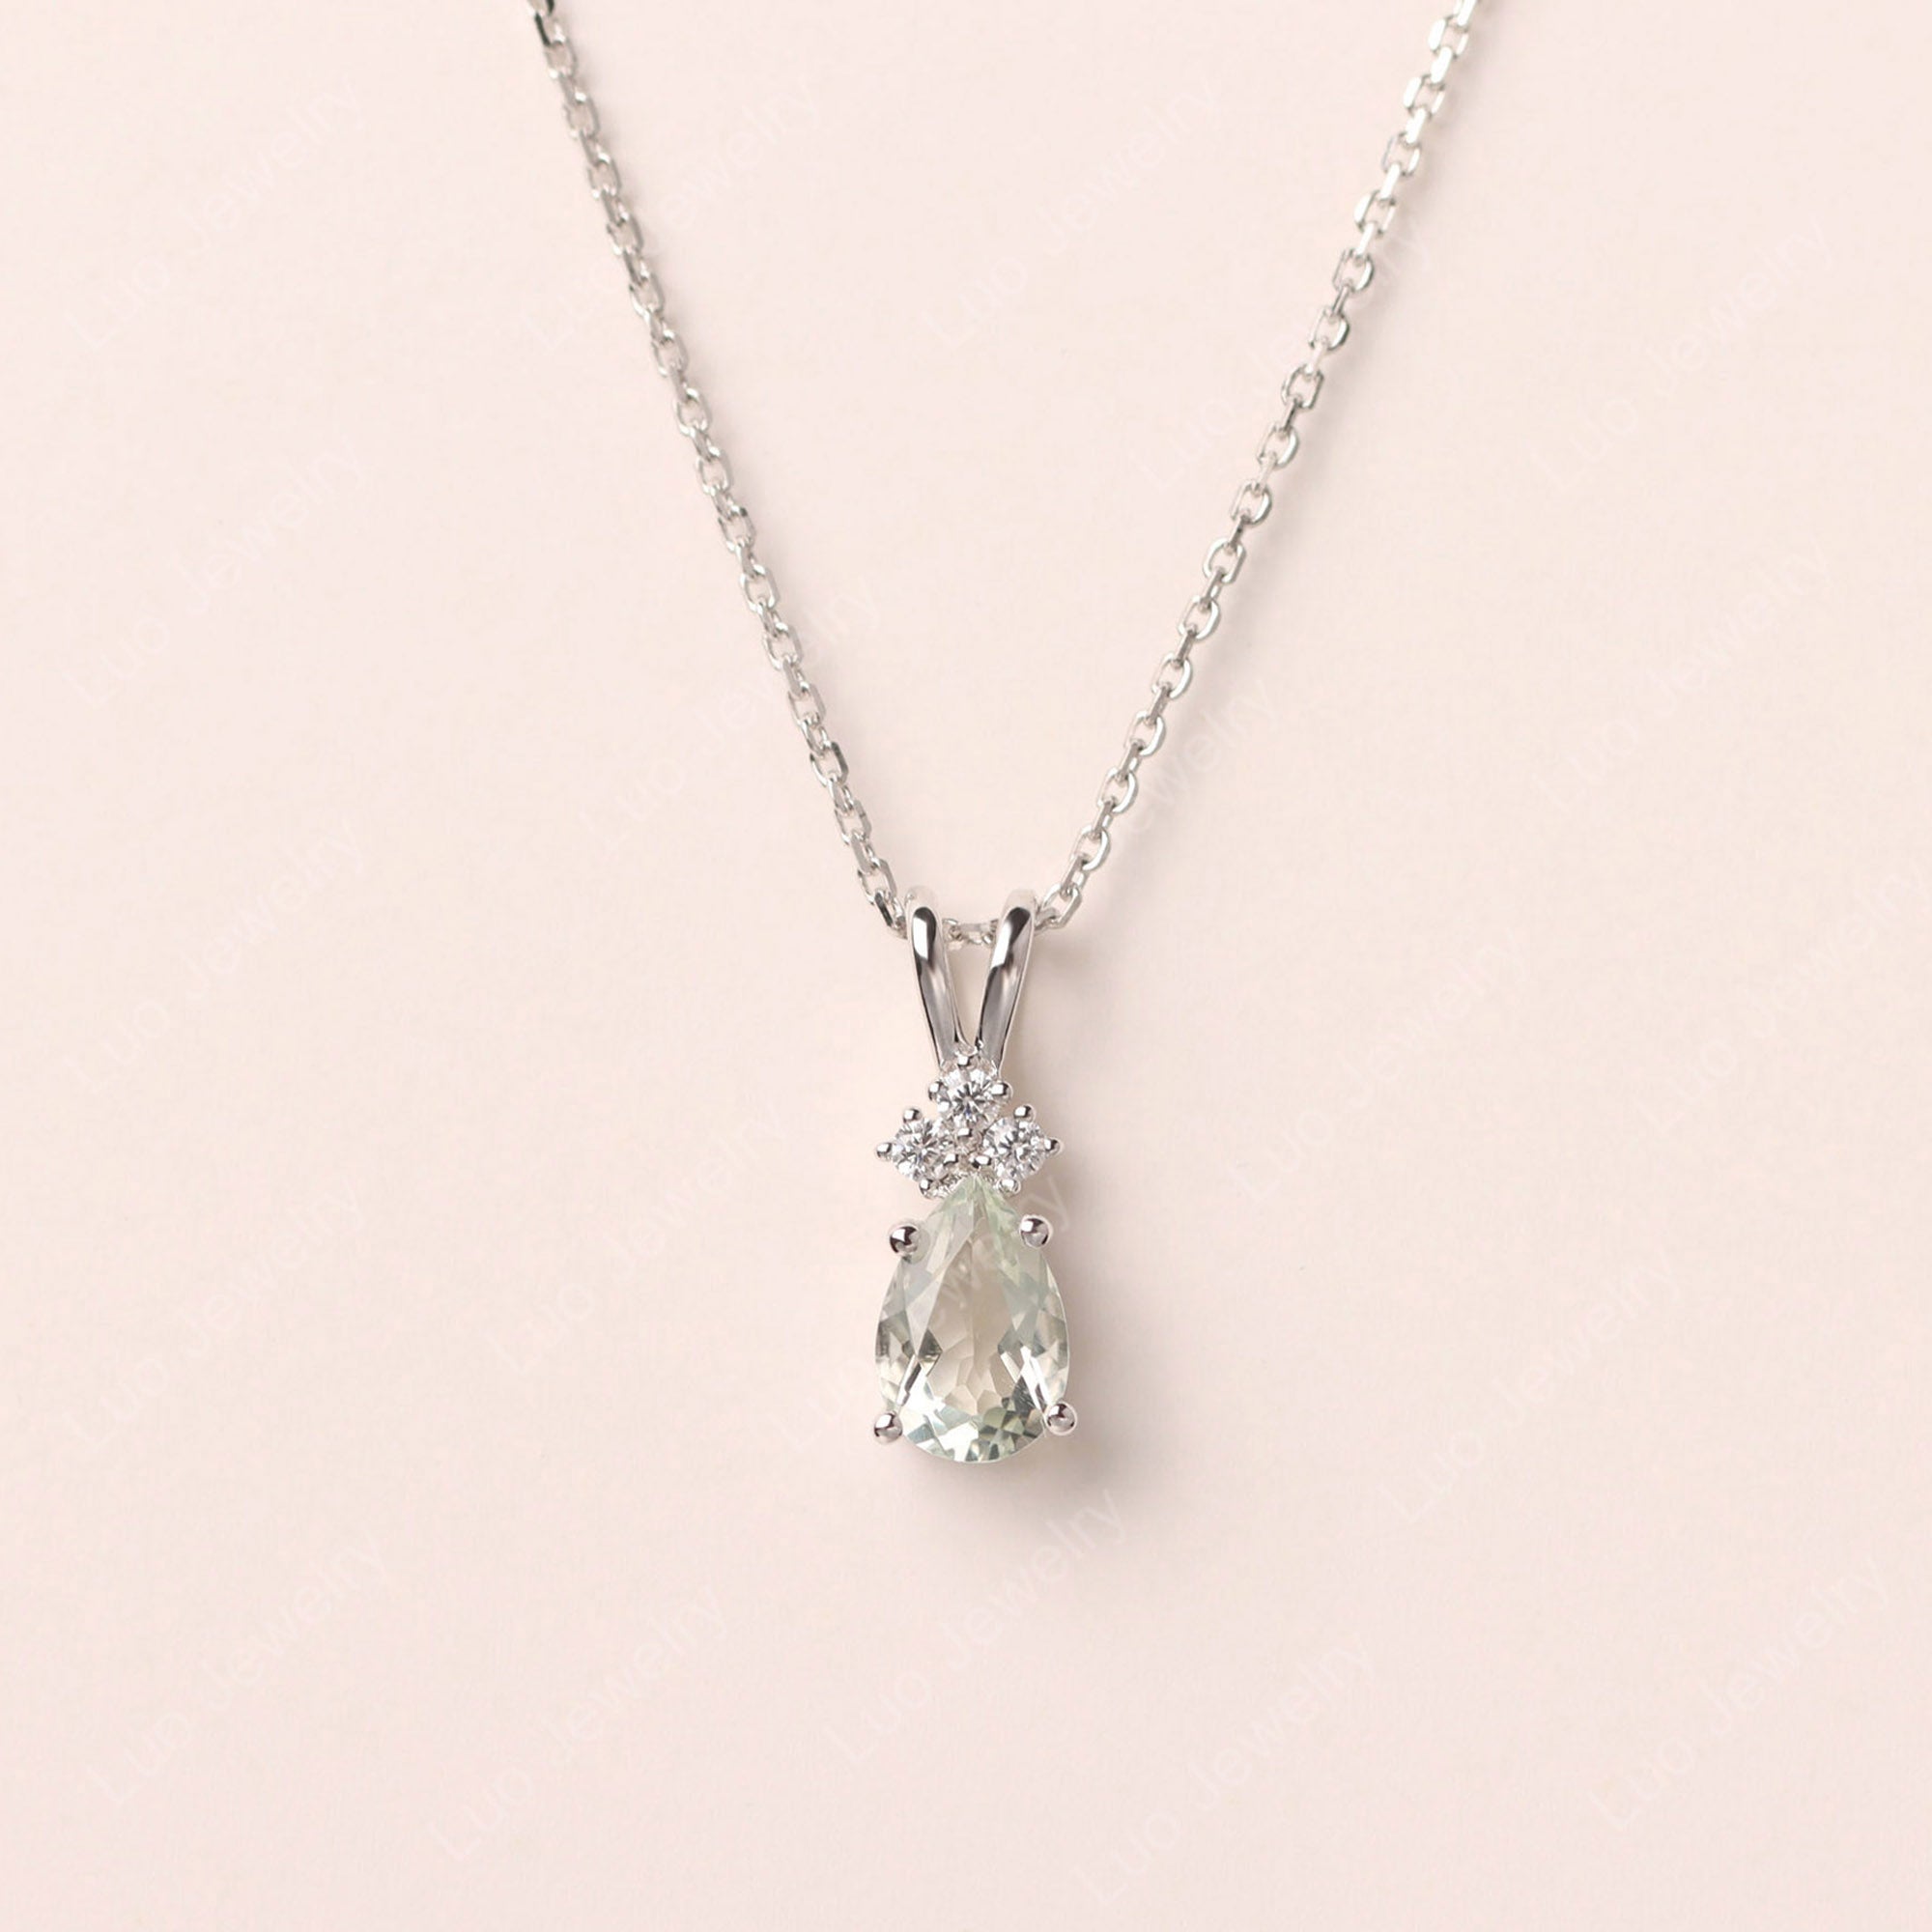 Pear Shaped Green Amethyst Necklace